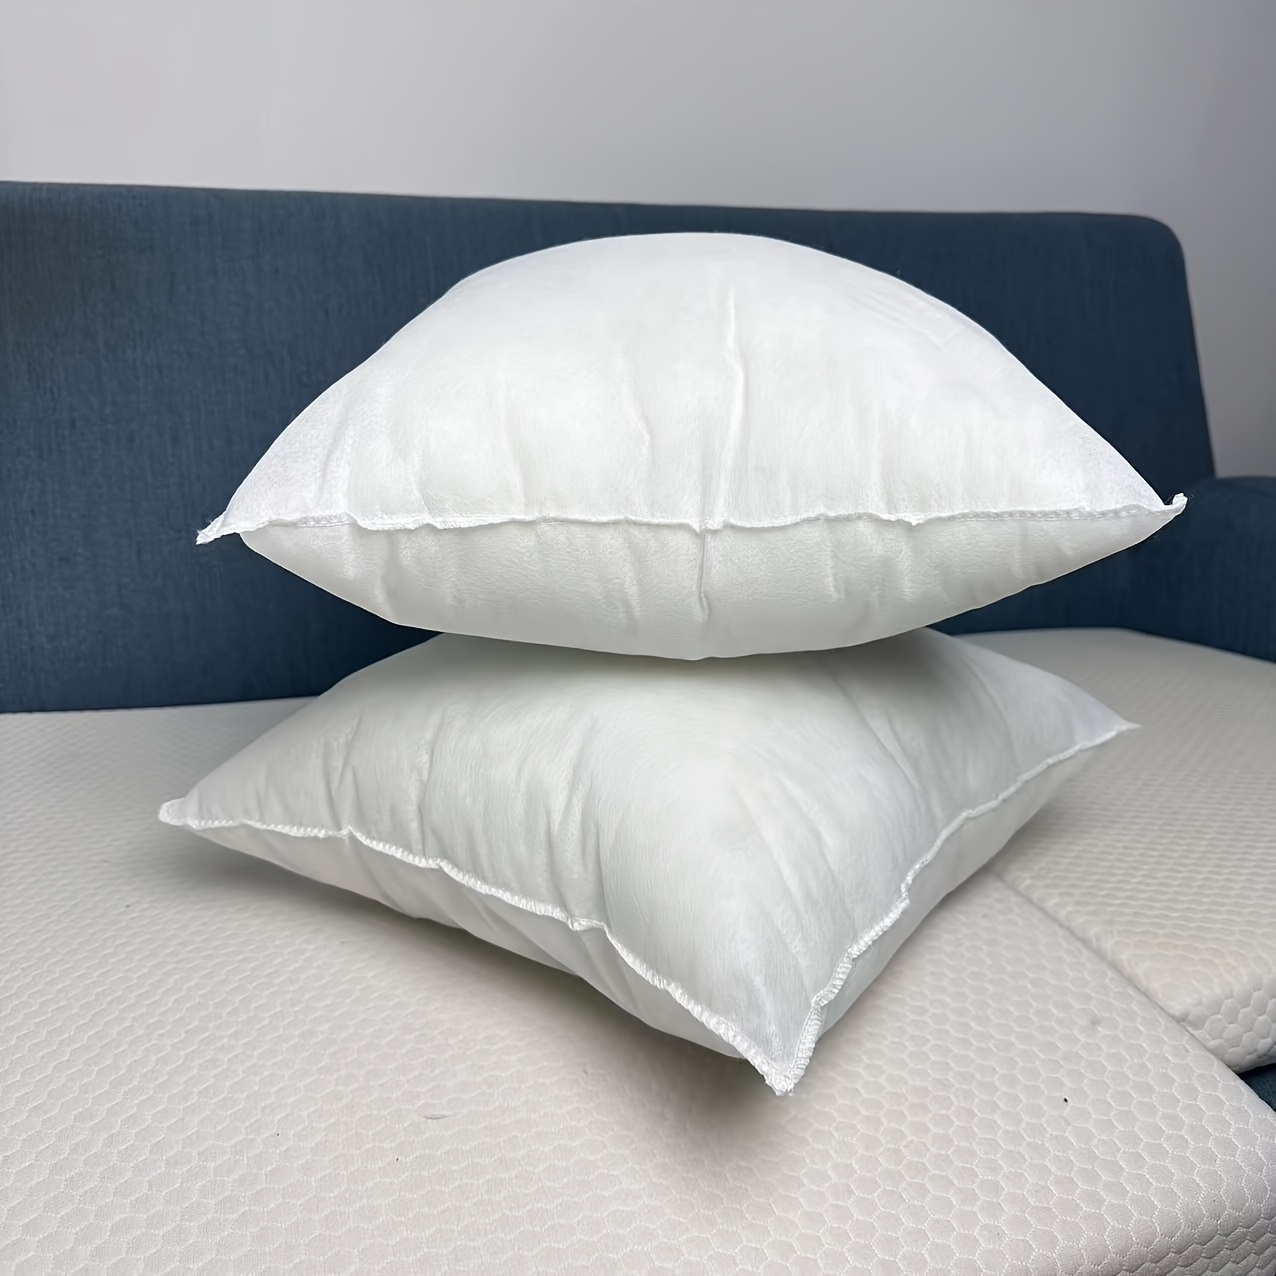 

2pcs Non-woven Fabric Pillow Inserts, High Elasticity, Contemporary Style, Home & Dorm Essential, Cushion Filling For Sofas And Beds